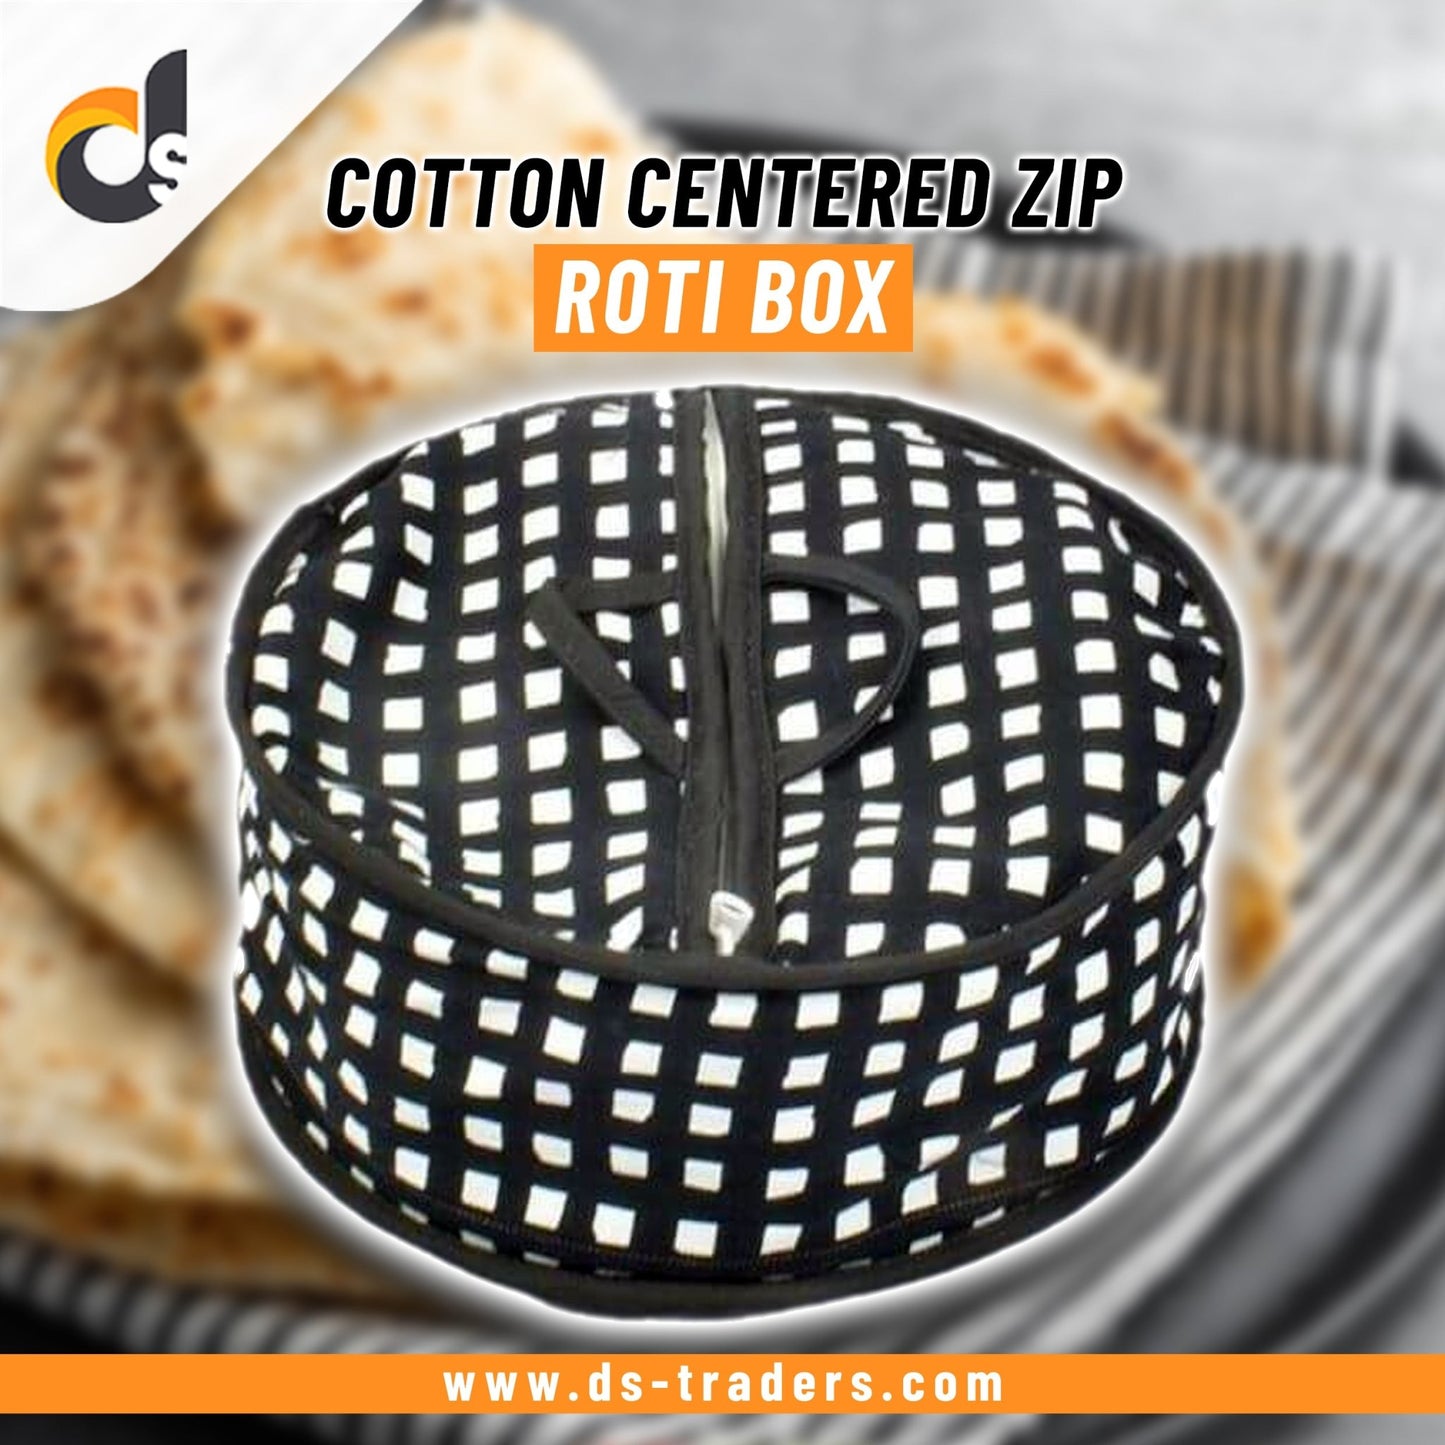 Cotton Centered Zip Roti Box - DS Traders